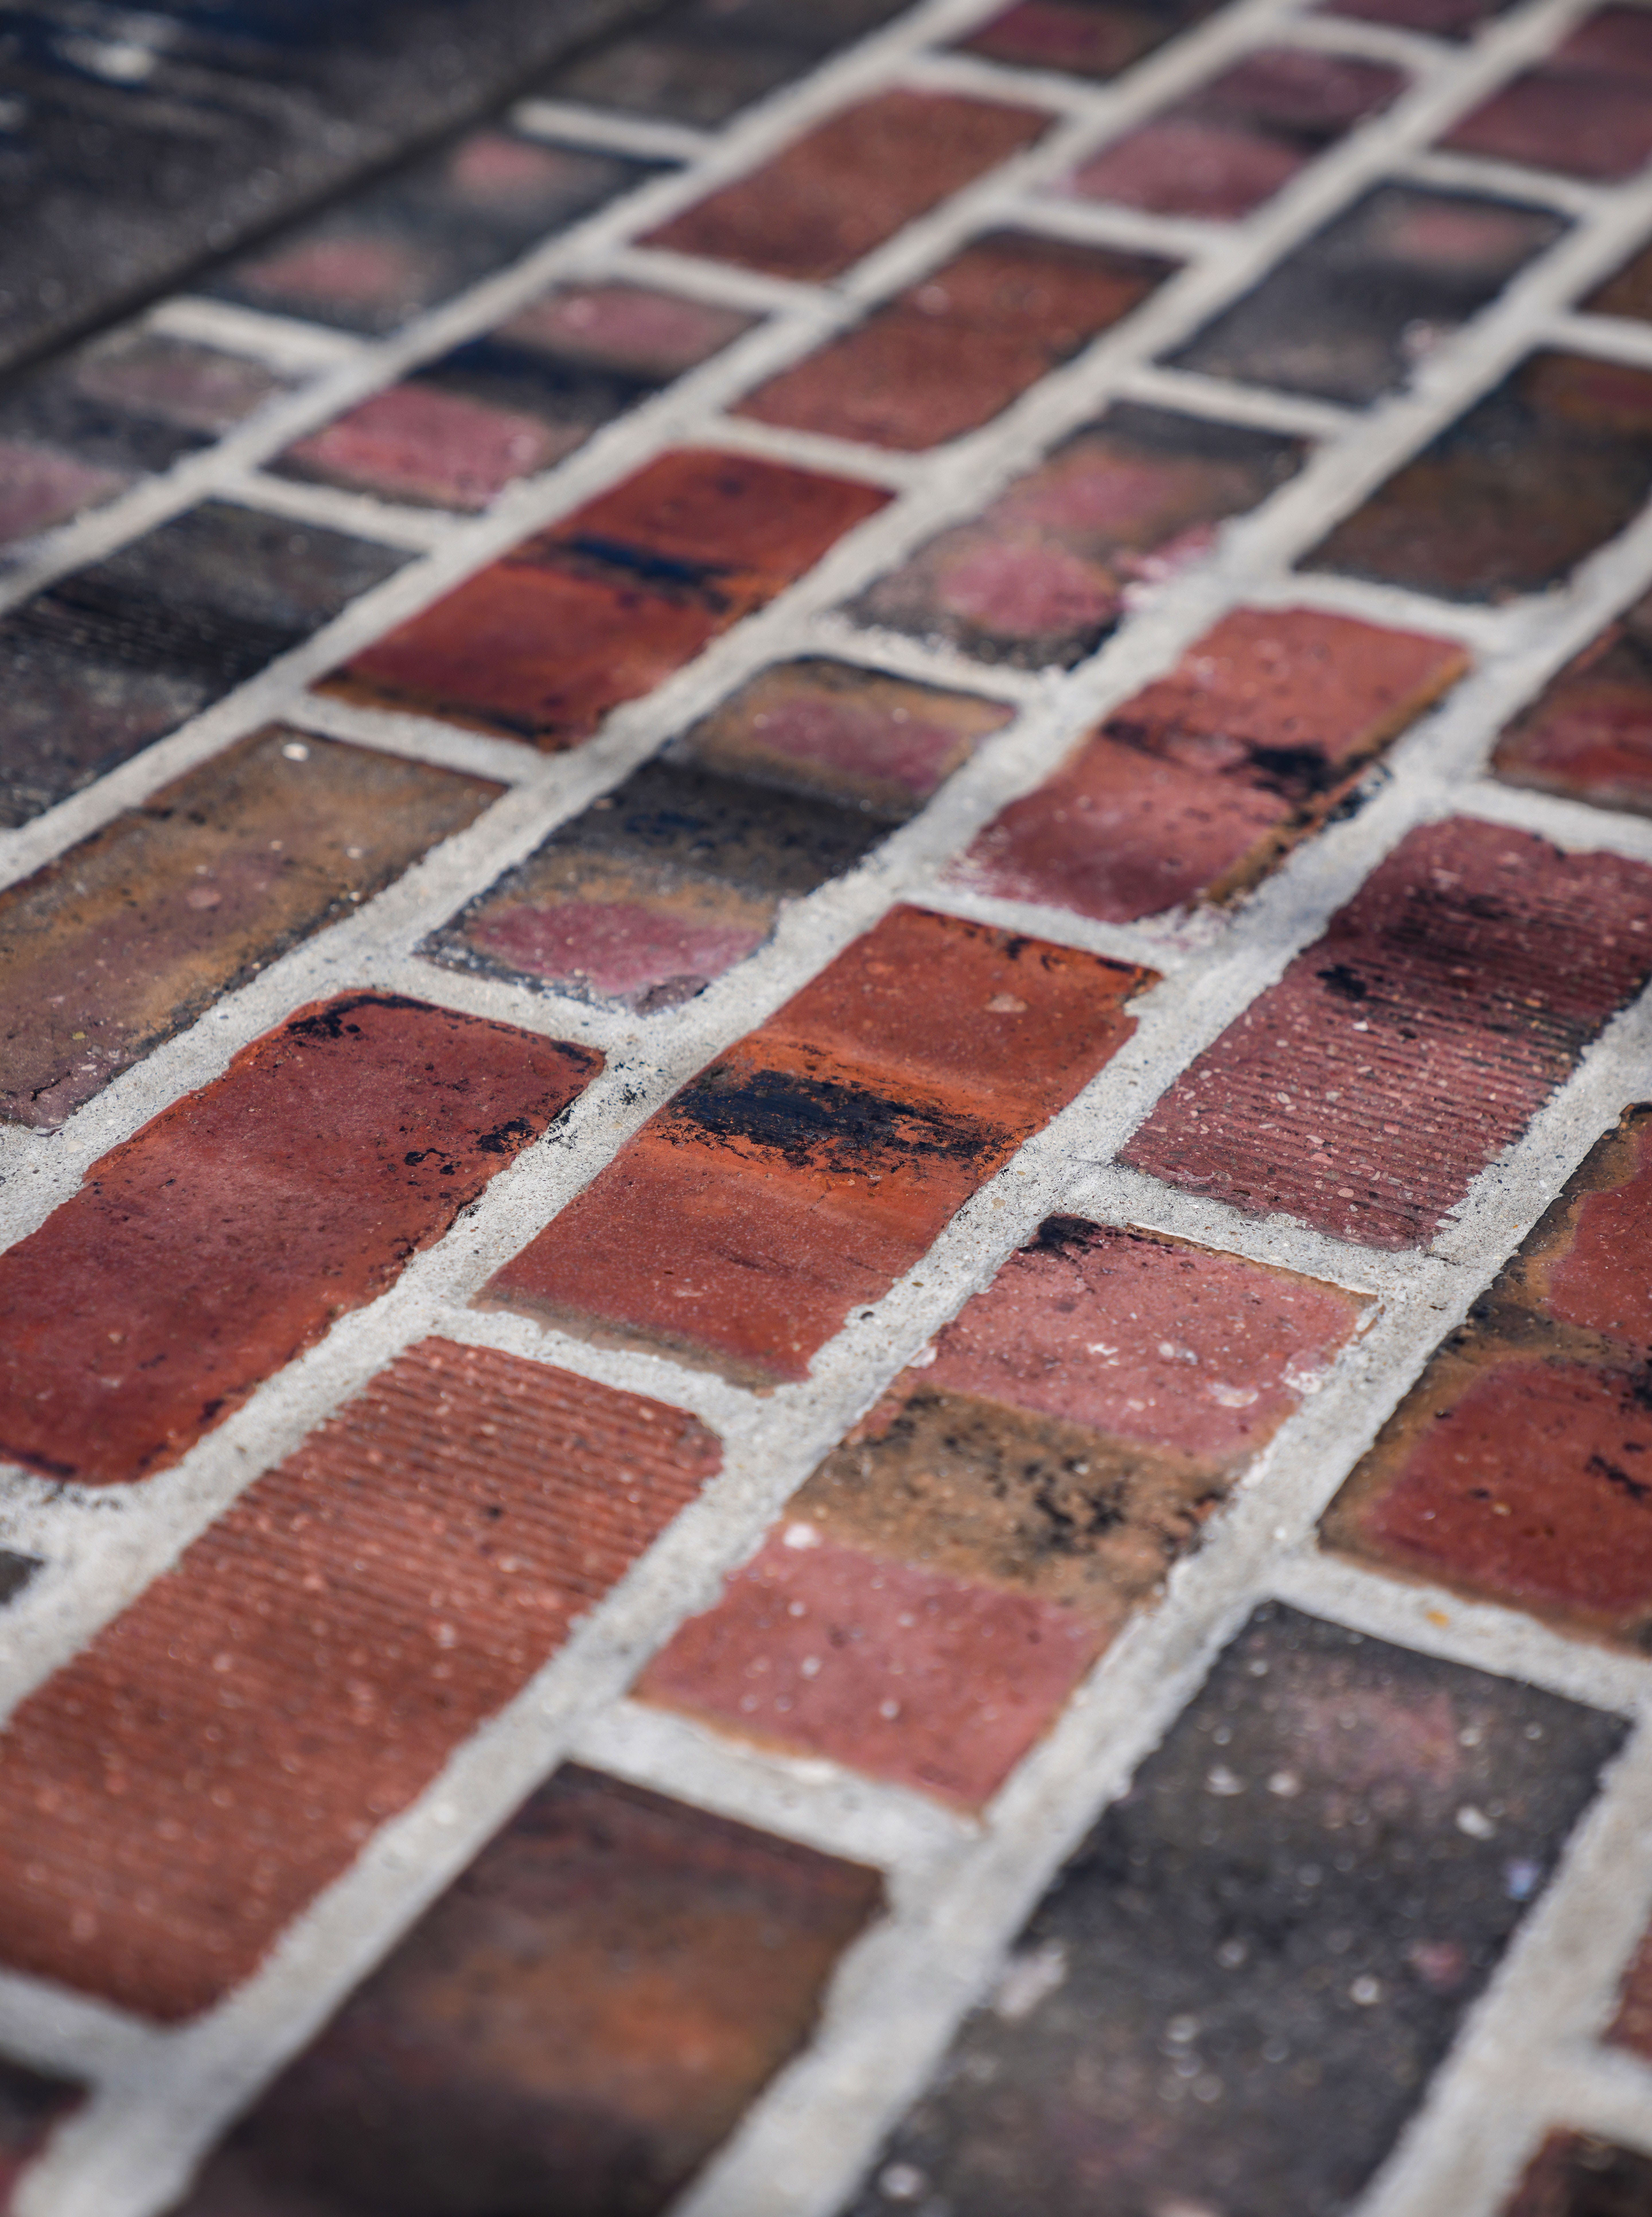 A secret stash of 125-year-old bricks at IMS tells hallowed story of an iconic race track